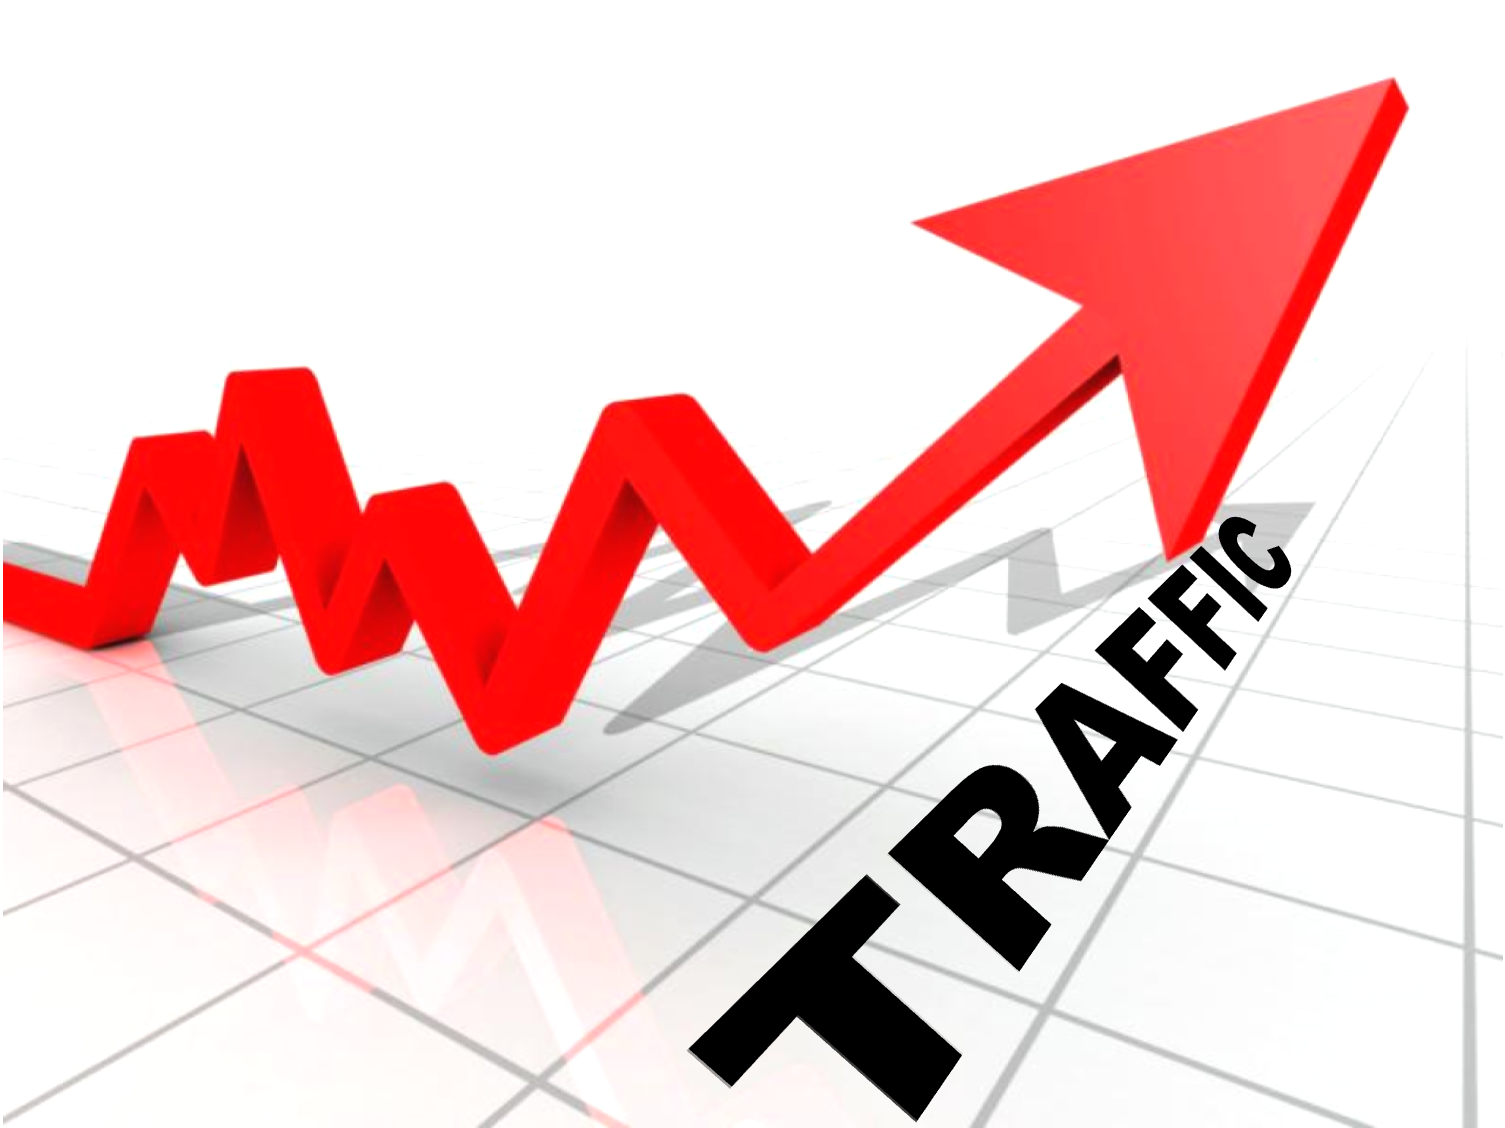 Increase your Website Traffic